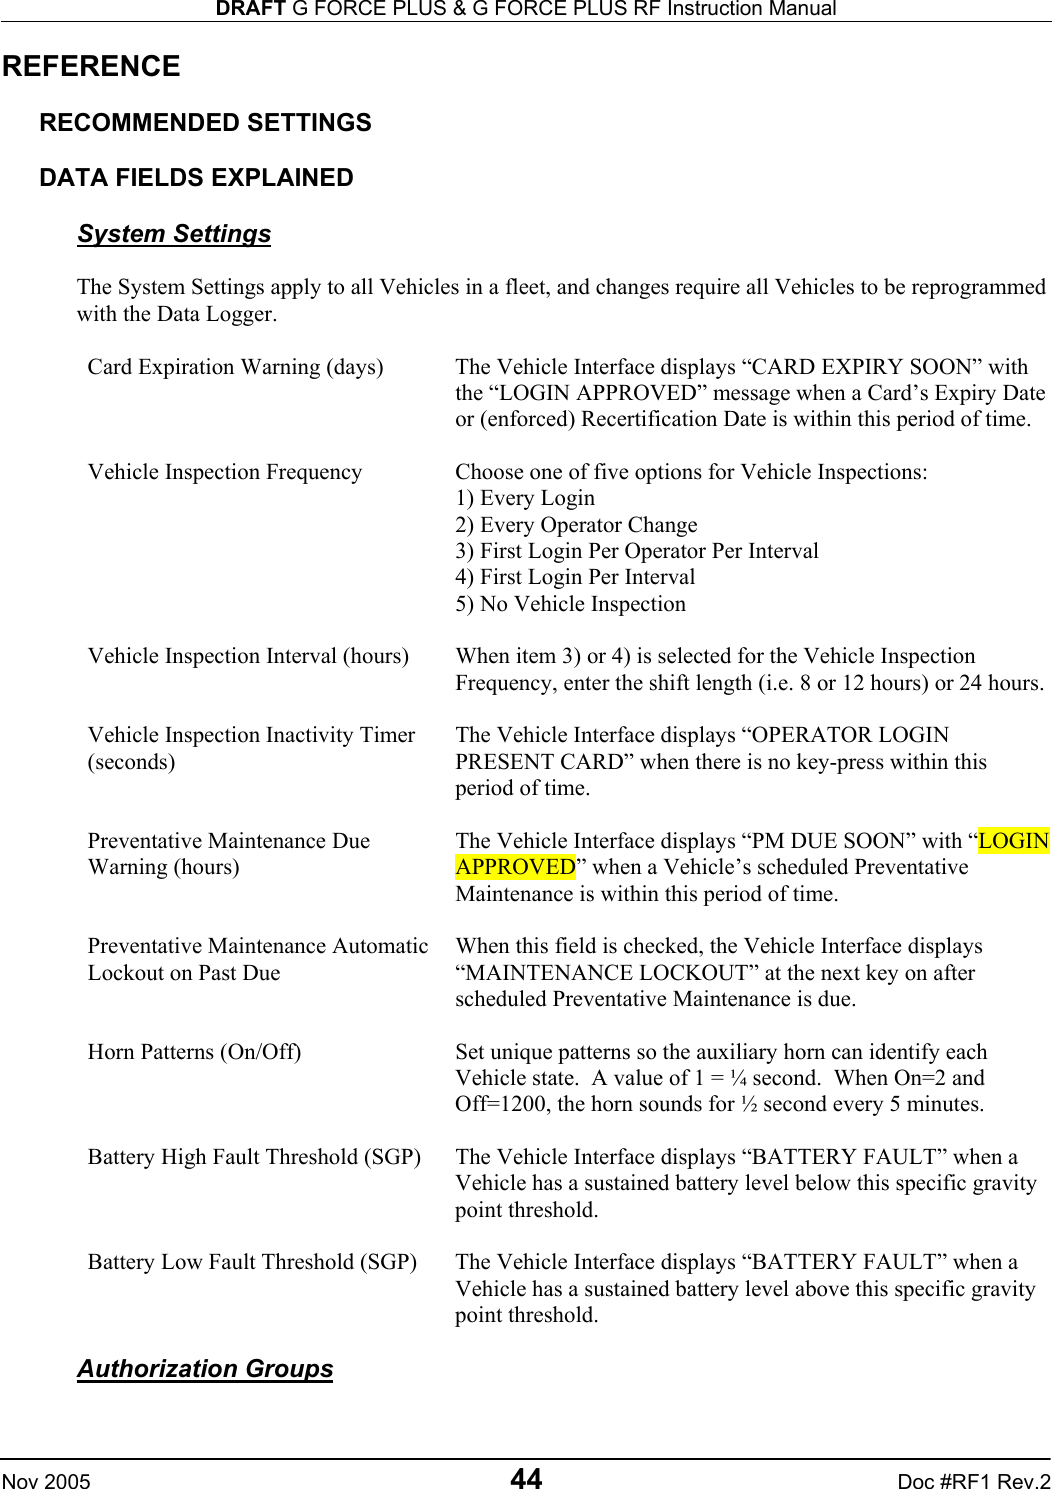 DRAFT G FORCE PLUS &amp; G FORCE PLUS RF Instruction Manual   Nov 2005 44 Doc #RF1 Rev.2 REFERENCE  RECOMMENDED SETTINGS  DATA FIELDS EXPLAINED  System Settings  The System Settings apply to all Vehicles in a fleet, and changes require all Vehicles to be reprogrammed with the Data Logger.  Card Expiration Warning (days)  The Vehicle Interface displays “CARD EXPIRY SOON” with the “LOGIN APPROVED” message when a Card’s Expiry Date or (enforced) Recertification Date is within this period of time.  Vehicle Inspection Frequency  Choose one of five options for Vehicle Inspections: 1) Every Login 2) Every Operator Change 3) First Login Per Operator Per Interval 4) First Login Per Interval 5) No Vehicle Inspection  Vehicle Inspection Interval (hours)  When item 3) or 4) is selected for the Vehicle Inspection Frequency, enter the shift length (i.e. 8 or 12 hours) or 24 hours.  Vehicle Inspection Inactivity Timer (seconds) The Vehicle Interface displays “OPERATOR LOGIN PRESENT CARD” when there is no key-press within this period of time.  Preventative Maintenance Due Warning (hours) The Vehicle Interface displays “PM DUE SOON” with “LOGIN APPROVED” when a Vehicle’s scheduled Preventative Maintenance is within this period of time.   Preventative Maintenance Automatic Lockout on Past Due When this field is checked, the Vehicle Interface displays “MAINTENANCE LOCKOUT” at the next key on after scheduled Preventative Maintenance is due.   Horn Patterns (On/Off)  Set unique patterns so the auxiliary horn can identify each Vehicle state.  A value of 1 = ¼ second.  When On=2 and Off=1200, the horn sounds for ½ second every 5 minutes.  Battery High Fault Threshold (SGP)  The Vehicle Interface displays “BATTERY FAULT” when a Vehicle has a sustained battery level below this specific gravity point threshold.  Battery Low Fault Threshold (SGP)  The Vehicle Interface displays “BATTERY FAULT” when a Vehicle has a sustained battery level above this specific gravity point threshold.  Authorization Groups  